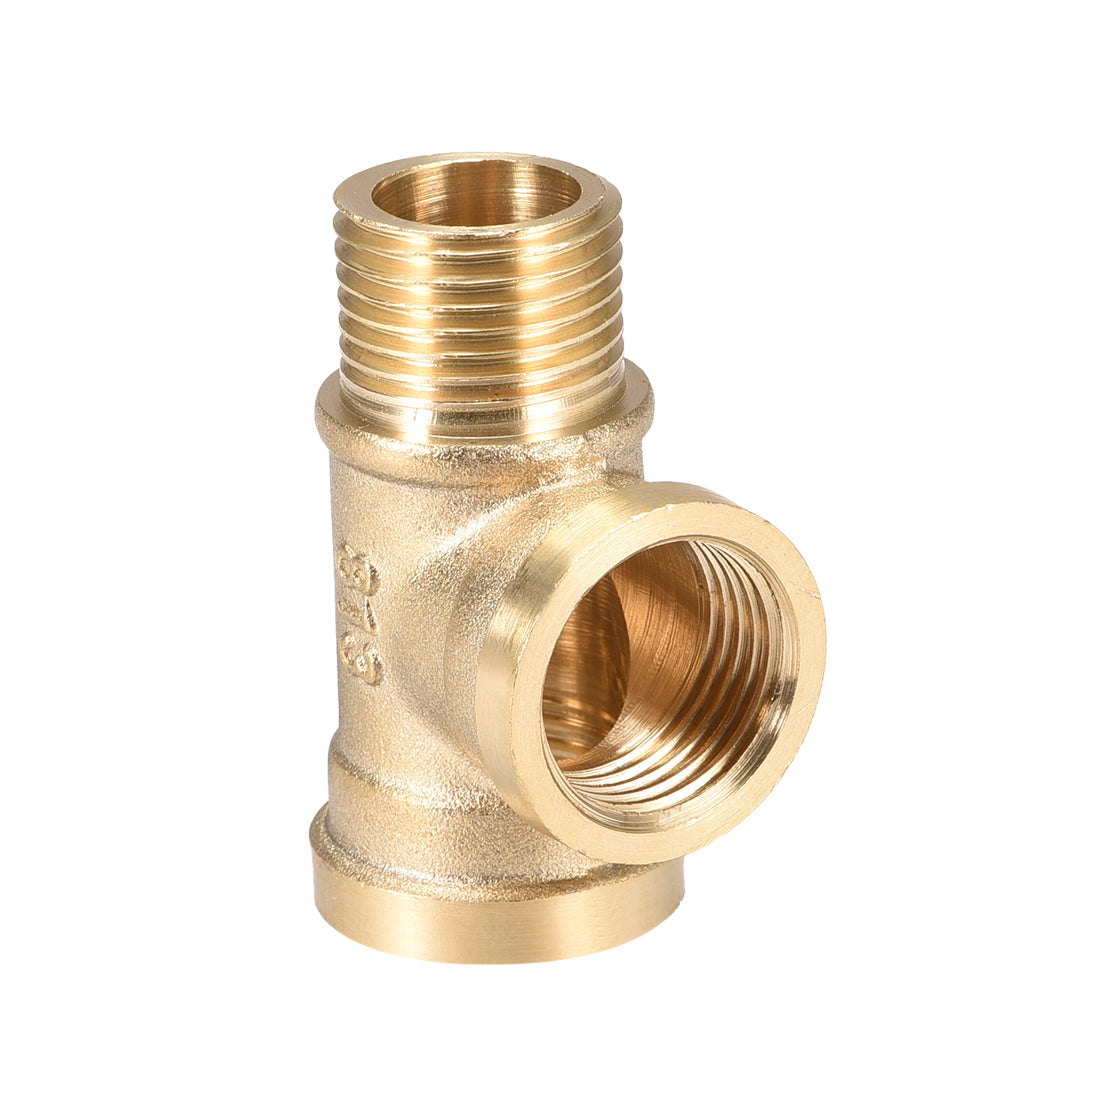 uxcell Uxcell Brass Tee Pipe Fitting G1/2 Male x G1/2 Female x G1/2 Female T Shaped Connector Coupler 3pcs